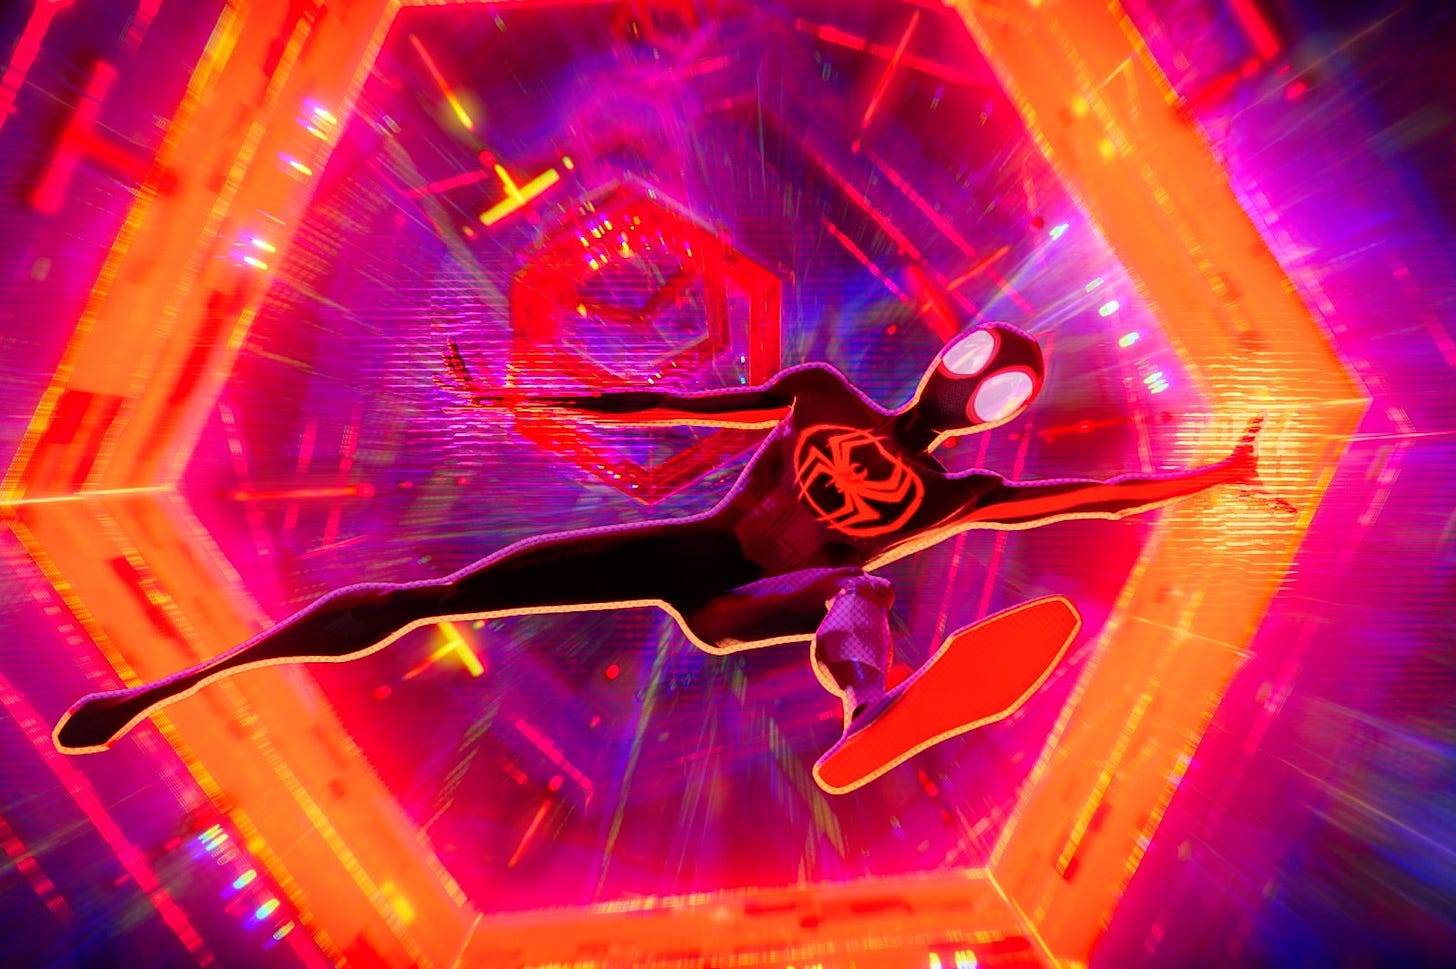 Miles Morales Spider-Man falling through hexagonal light portals to travel across the Spider-Verse